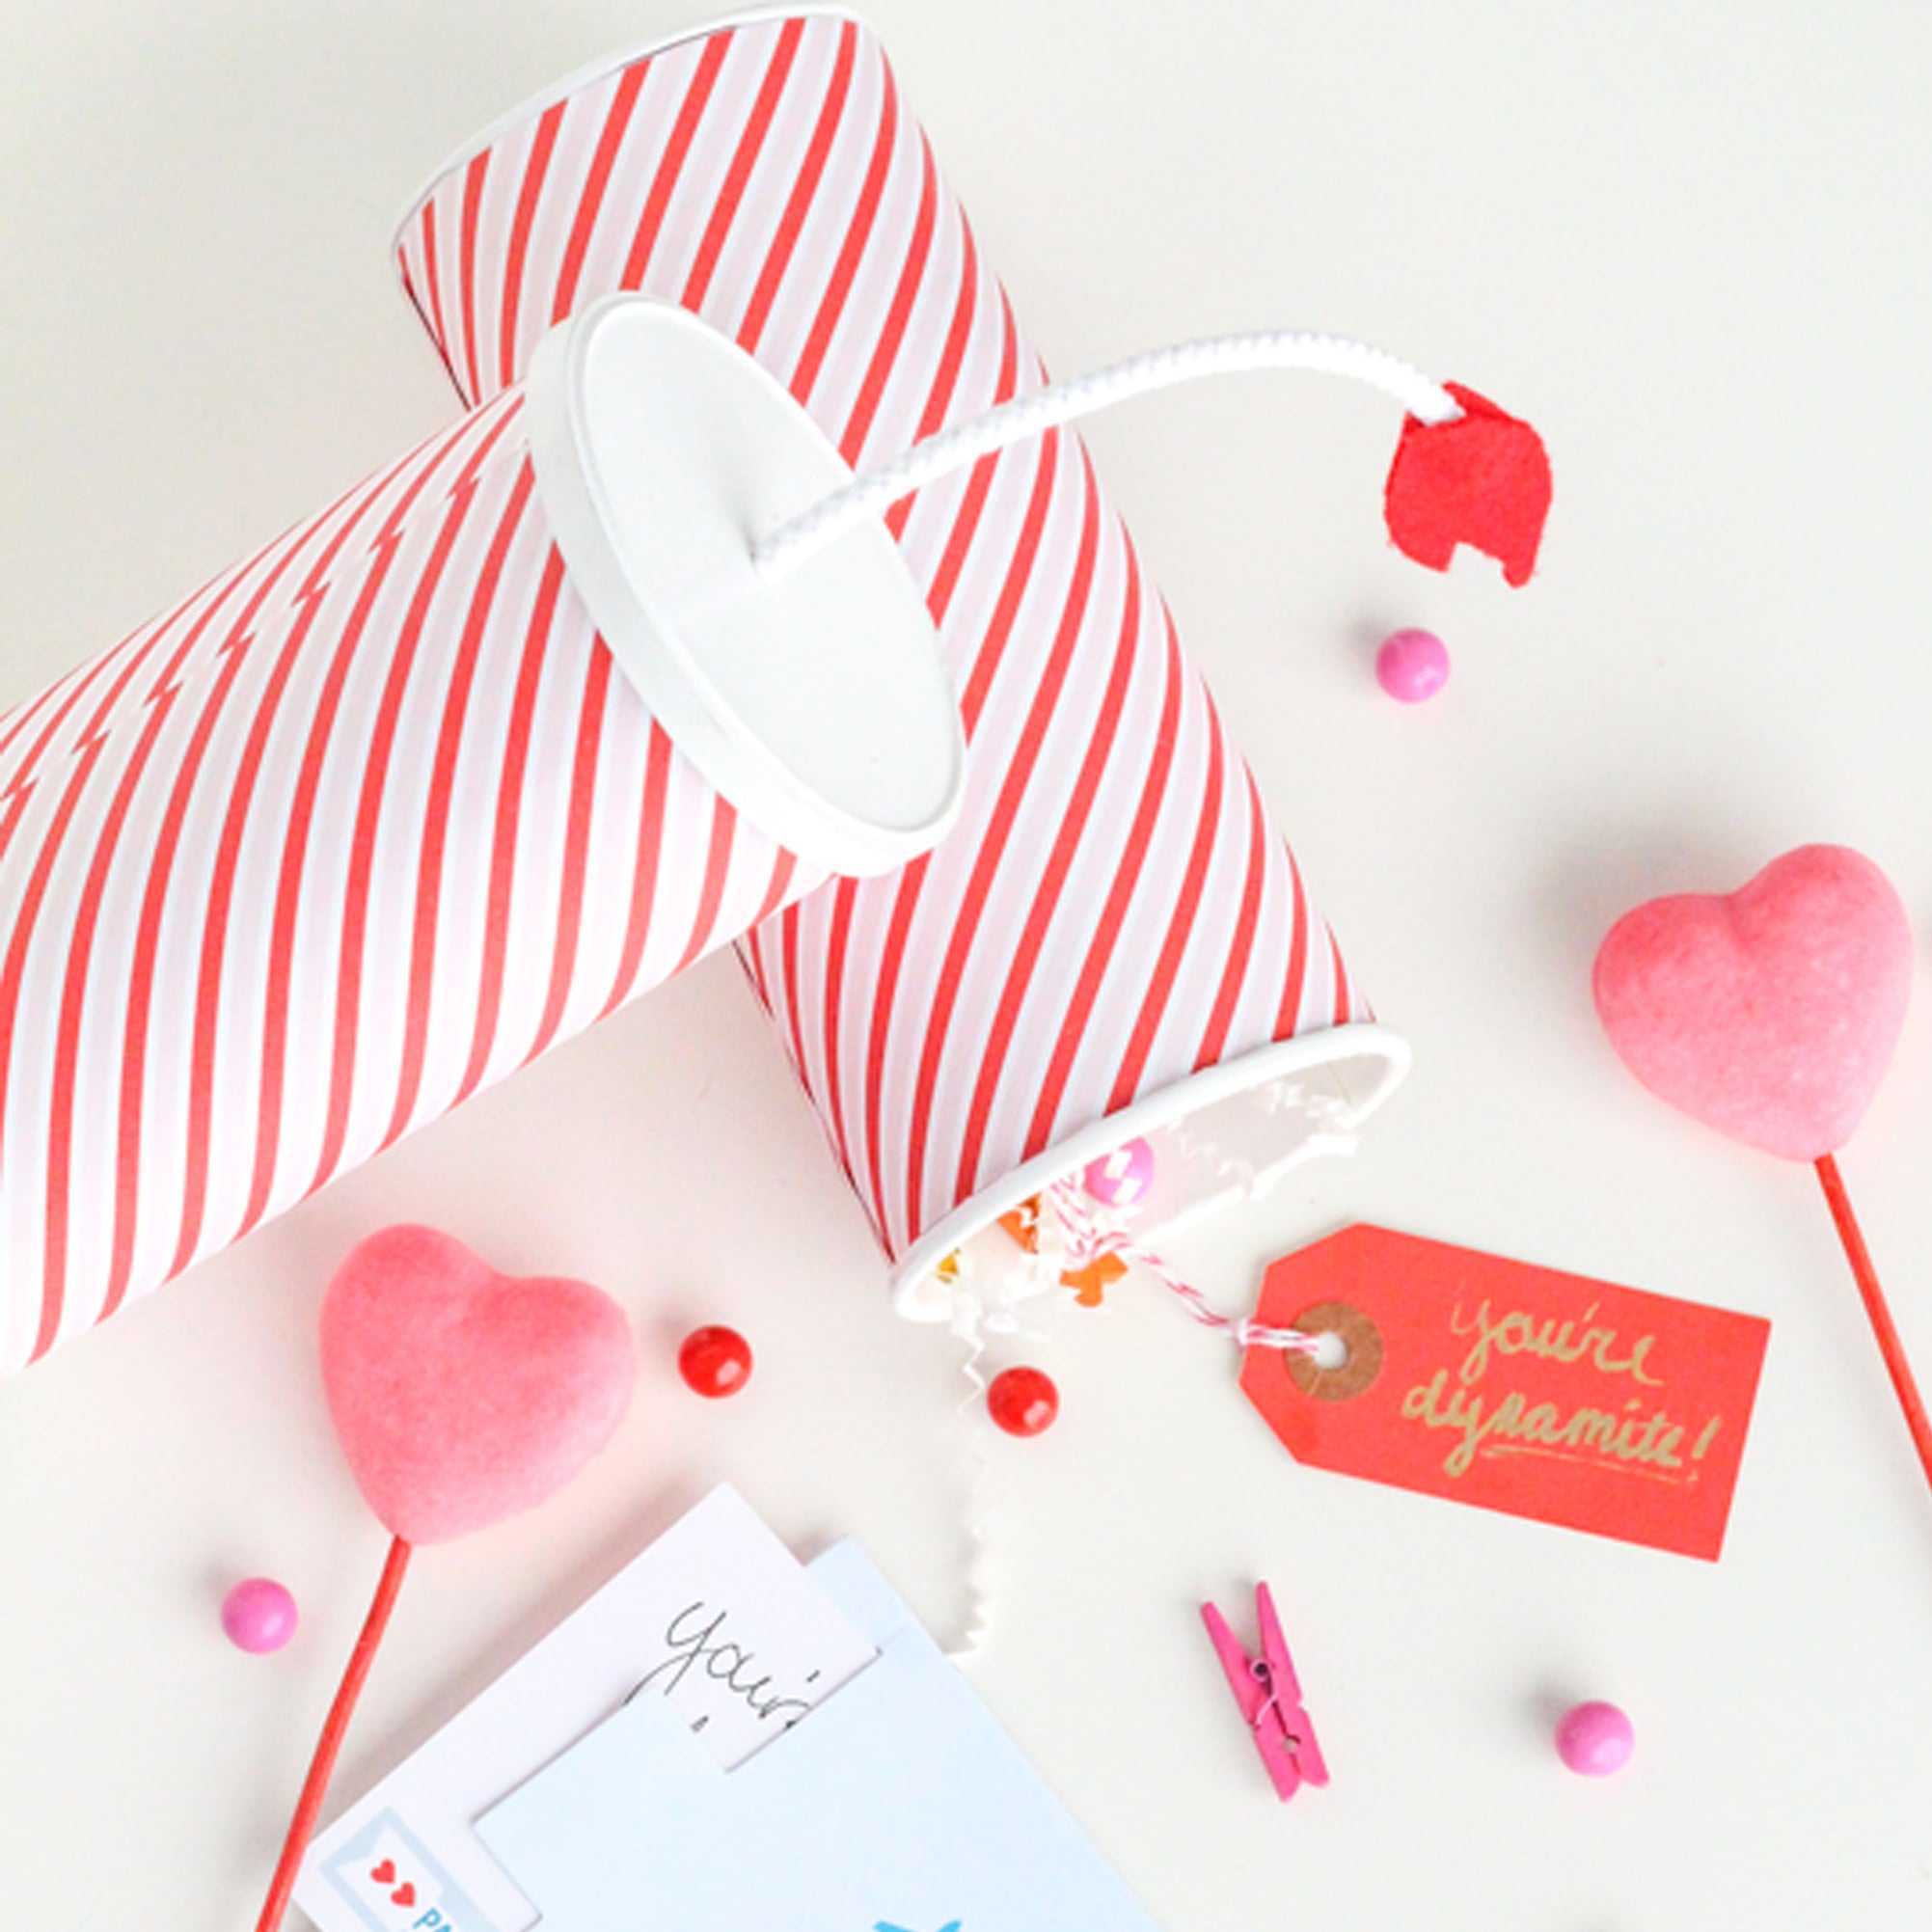 Diy Noncandy Valentine's Day Card And Treat Ideas For Kids Inside Valentine Card Template For Kids